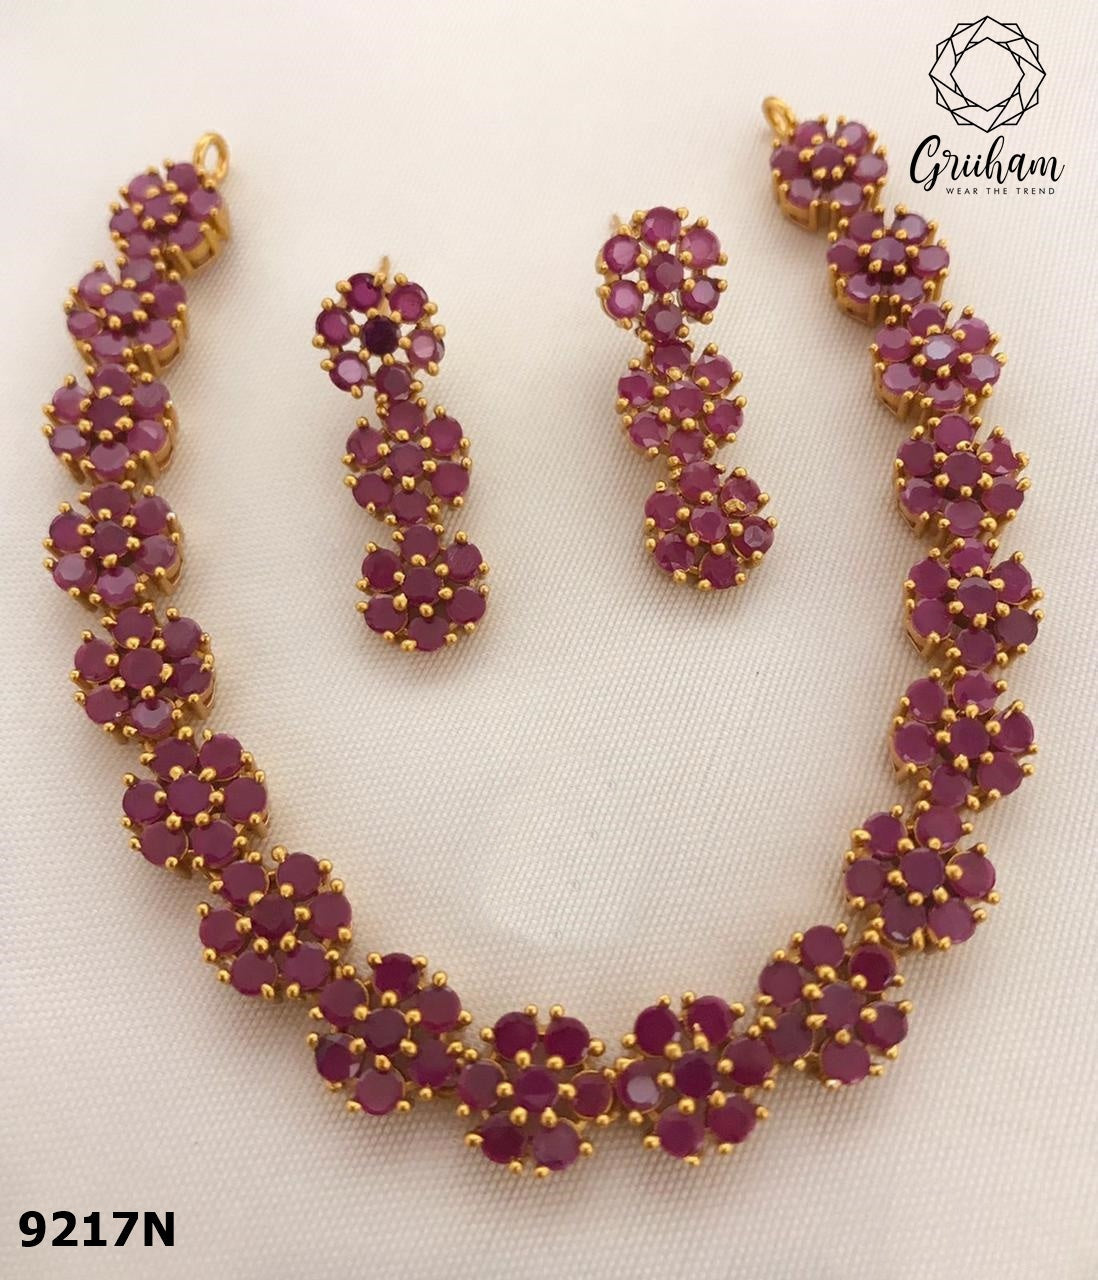 Premium Gold Plated Floral Necklace Set with diff Colours big stones 9217N-Necklace Set-Griiham-Ruby Red-Griiham